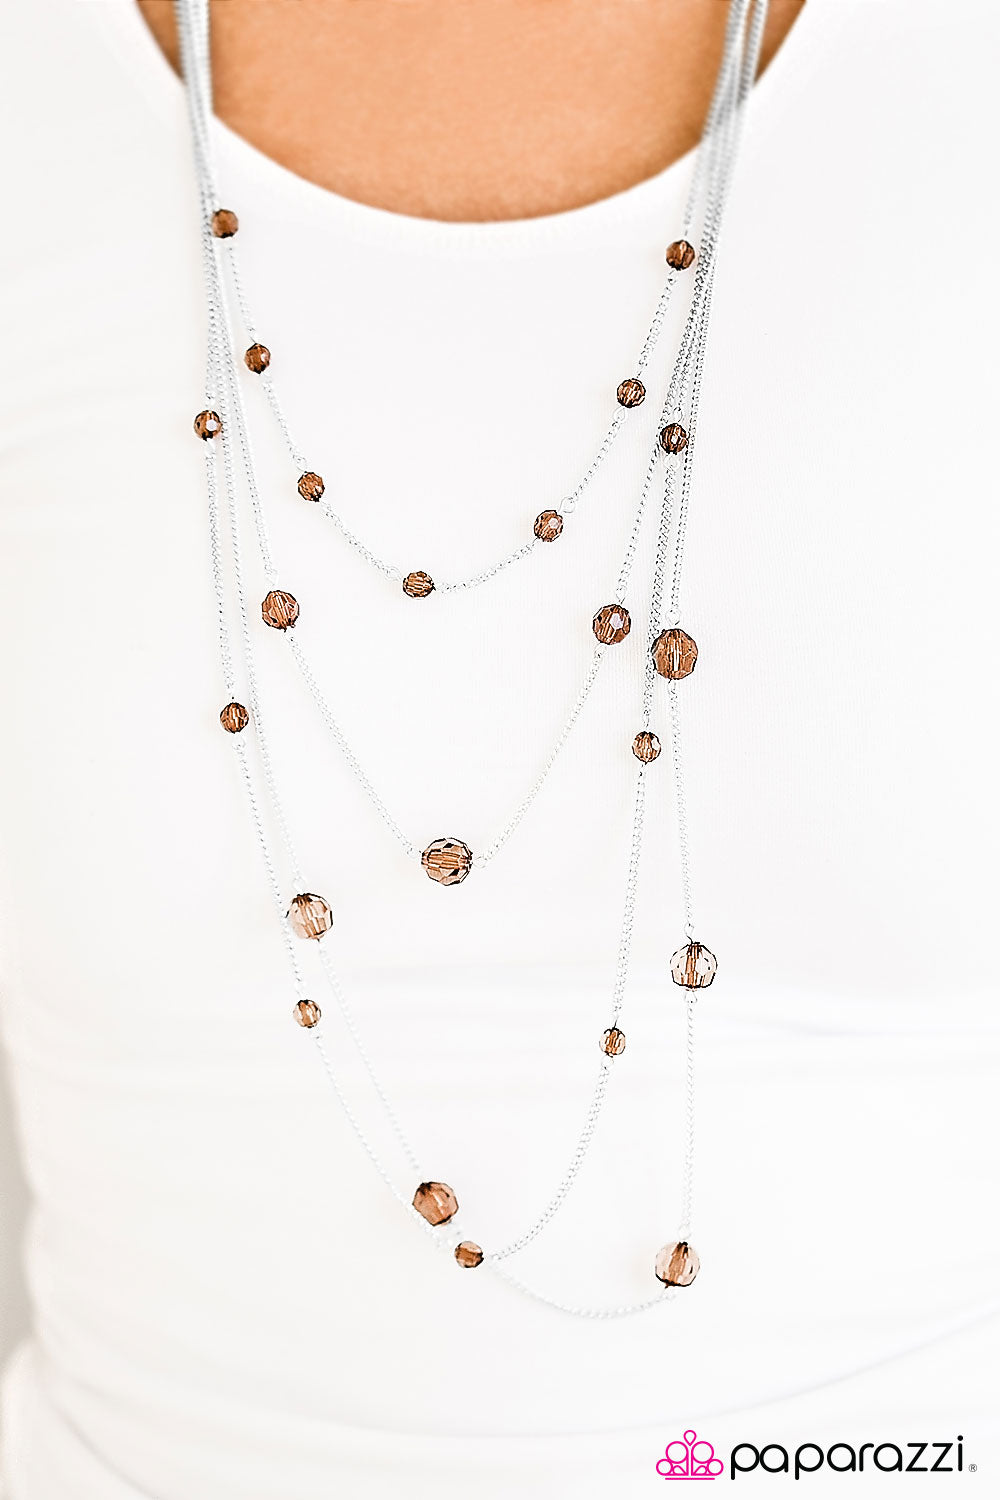 Sparkling Intentions - Brown - Paparazzi necklace